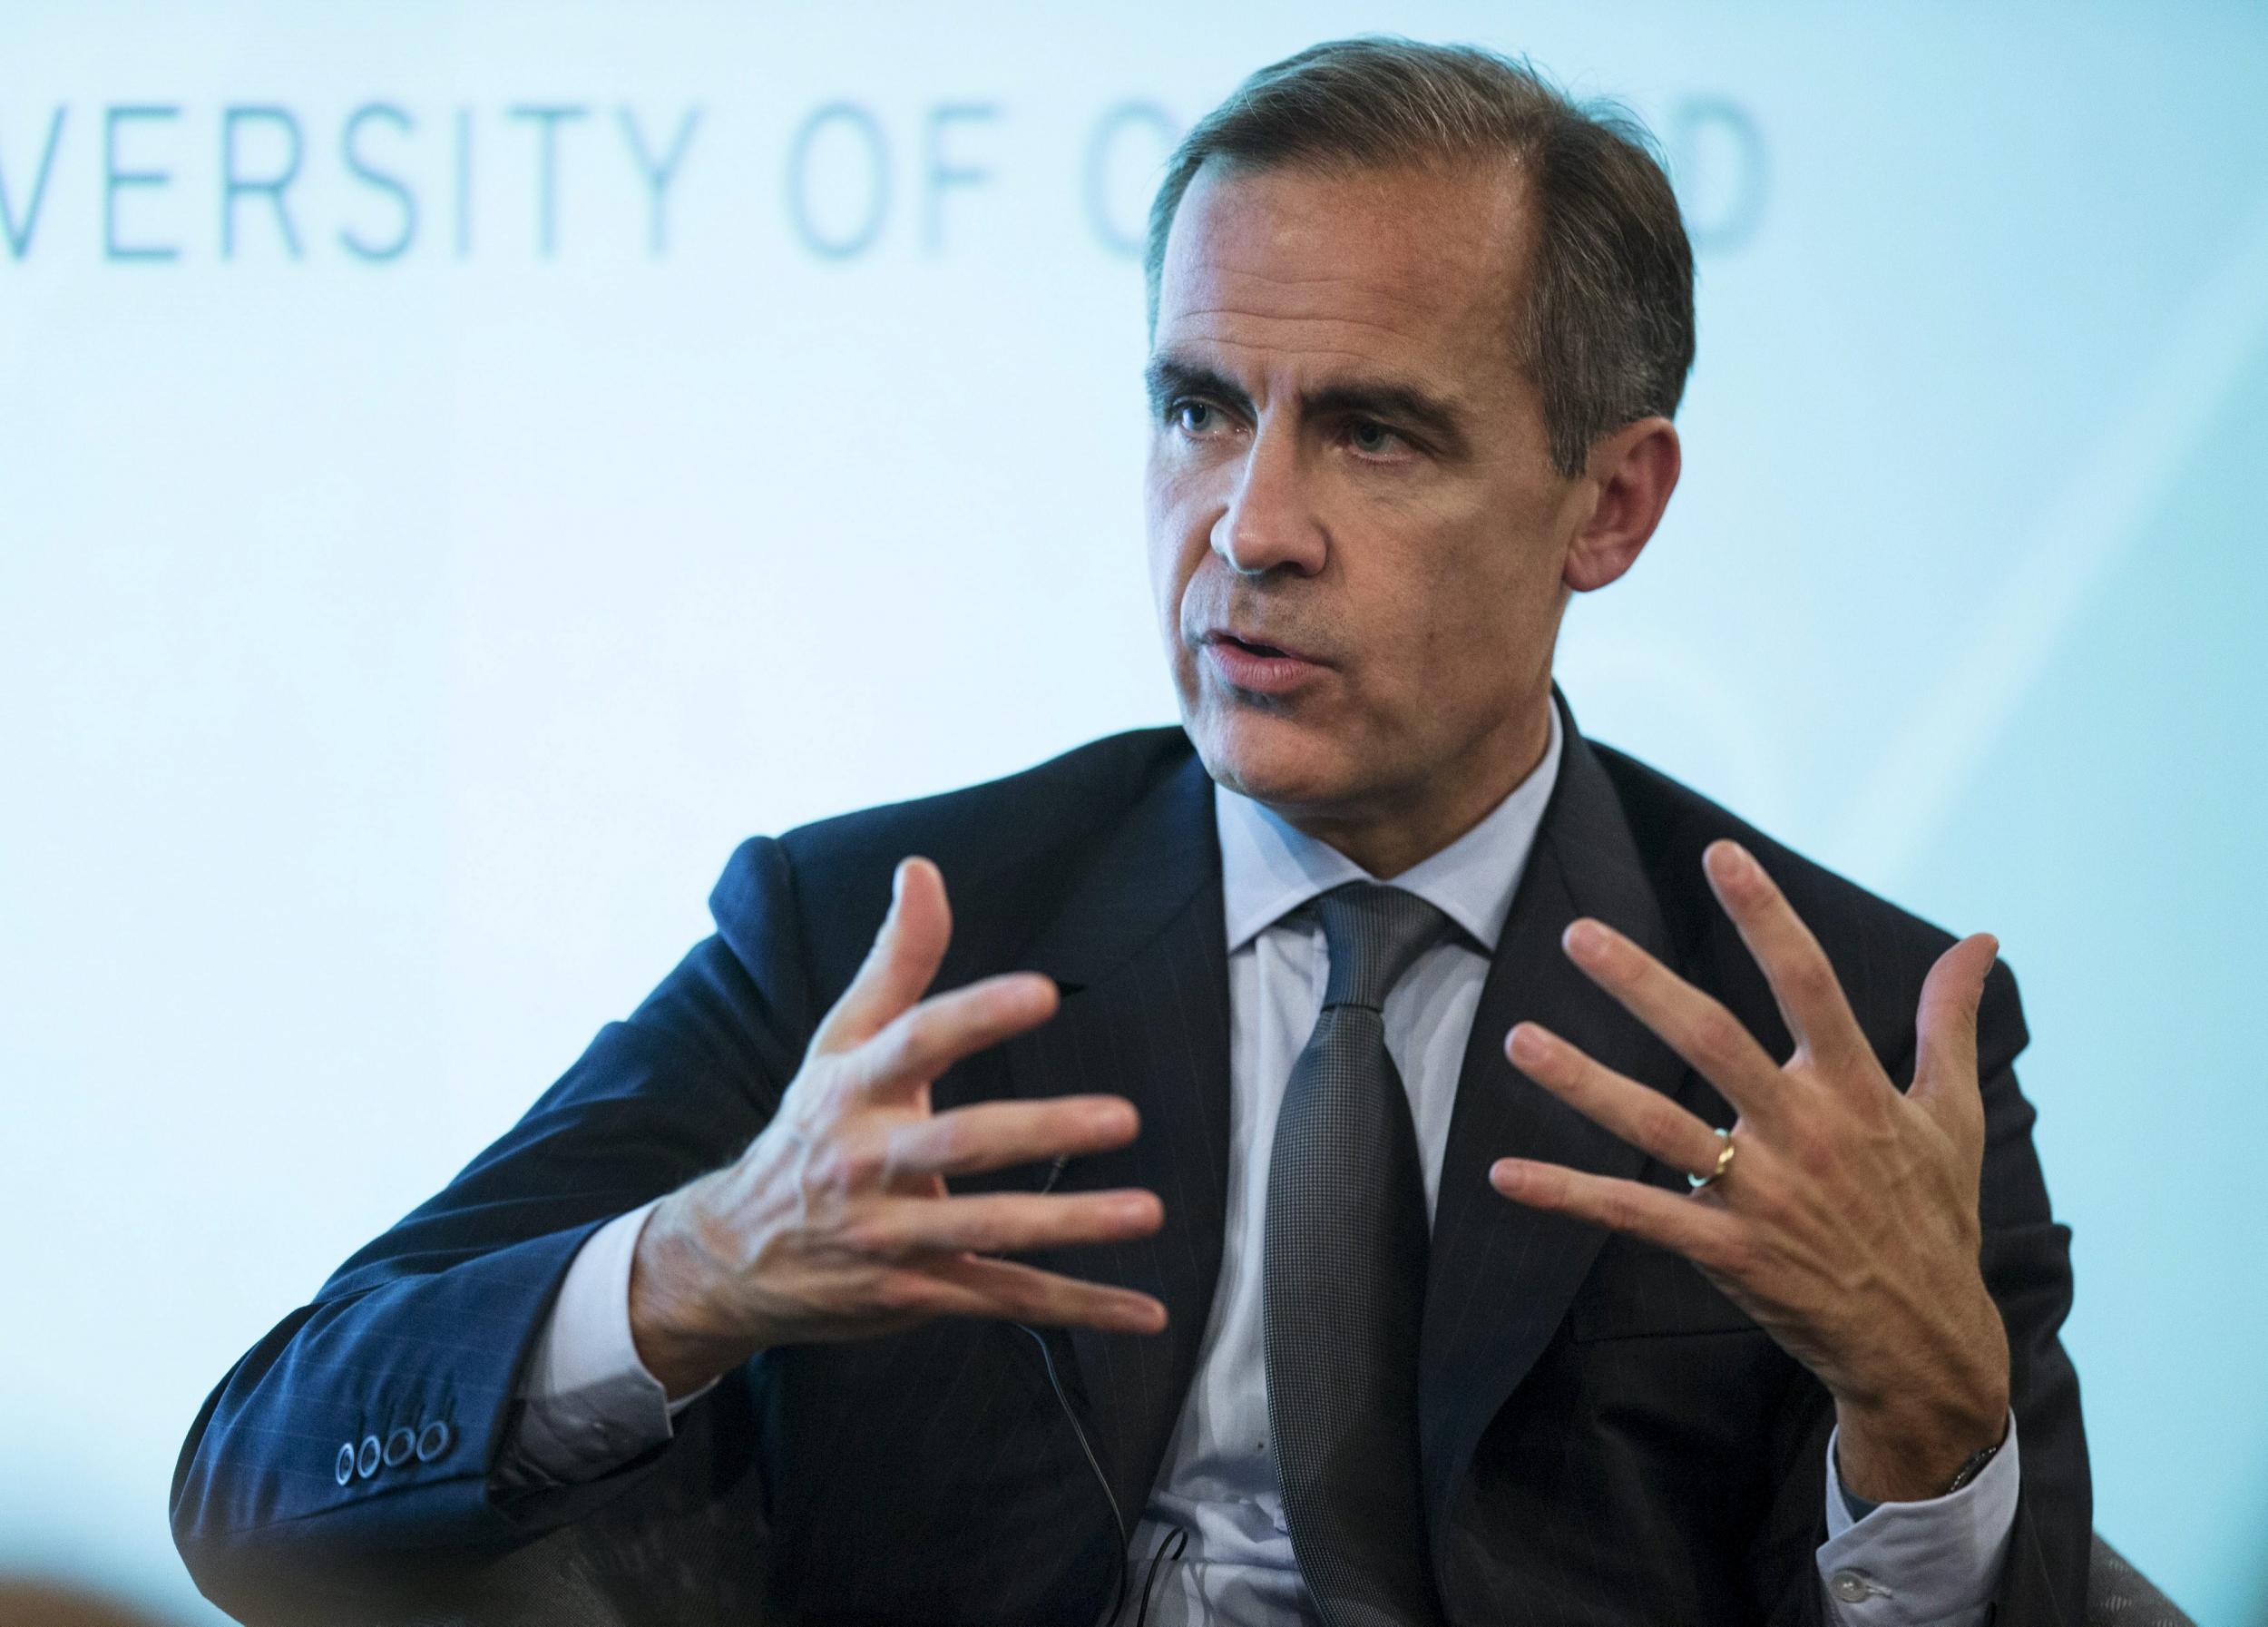 Mark Carney highlighted the benefits of EU membership in a speech in Oxford on Wednesday